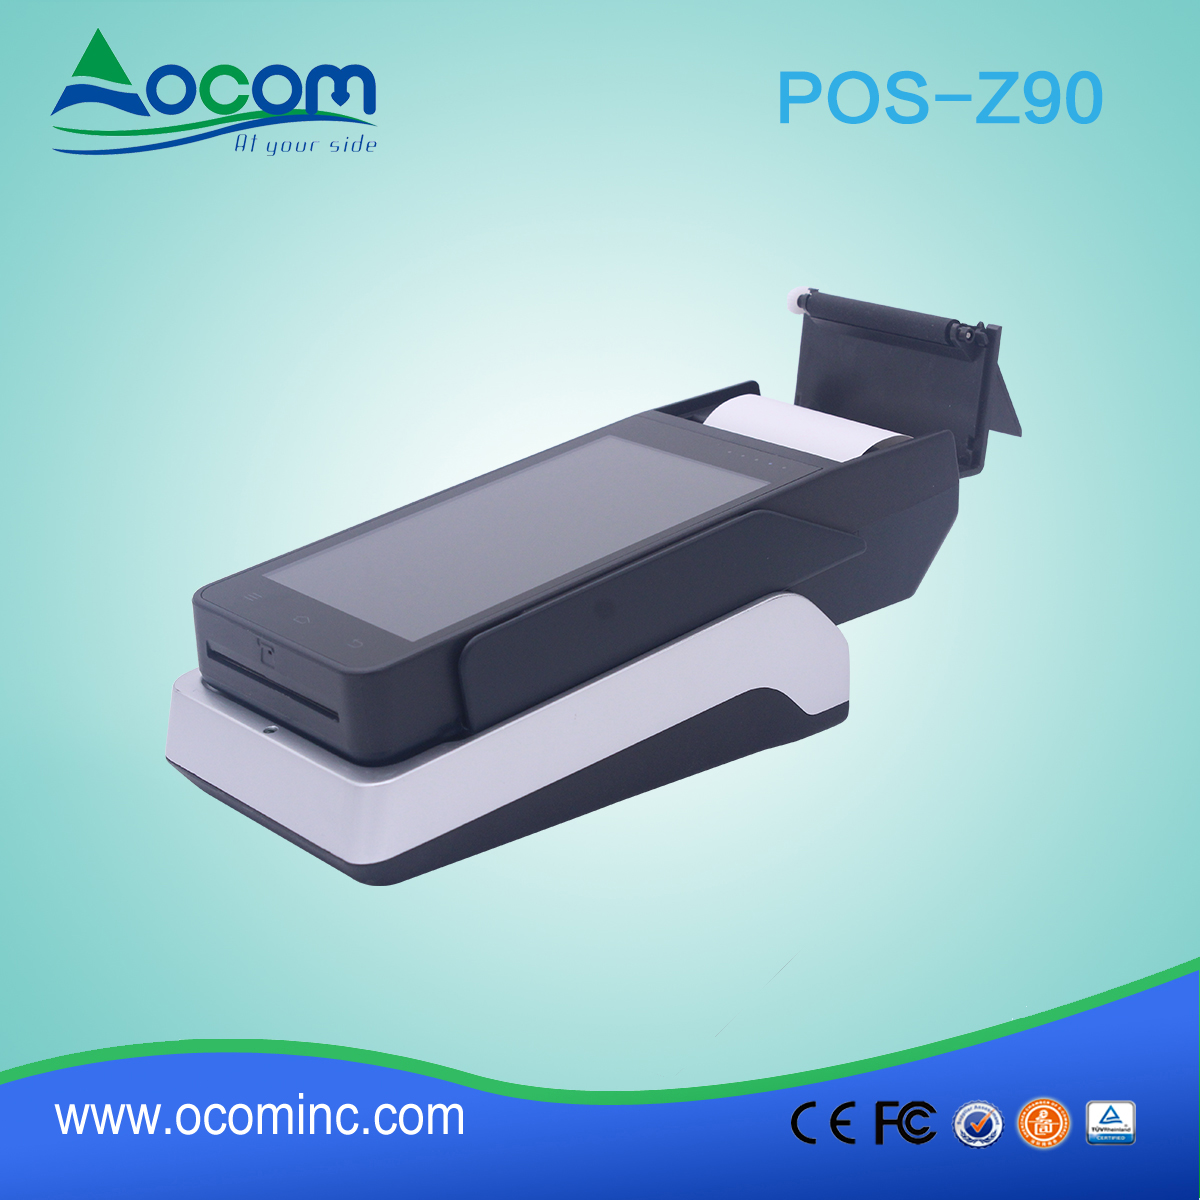 Z90 New High Performance Android POS Terminal with Printer